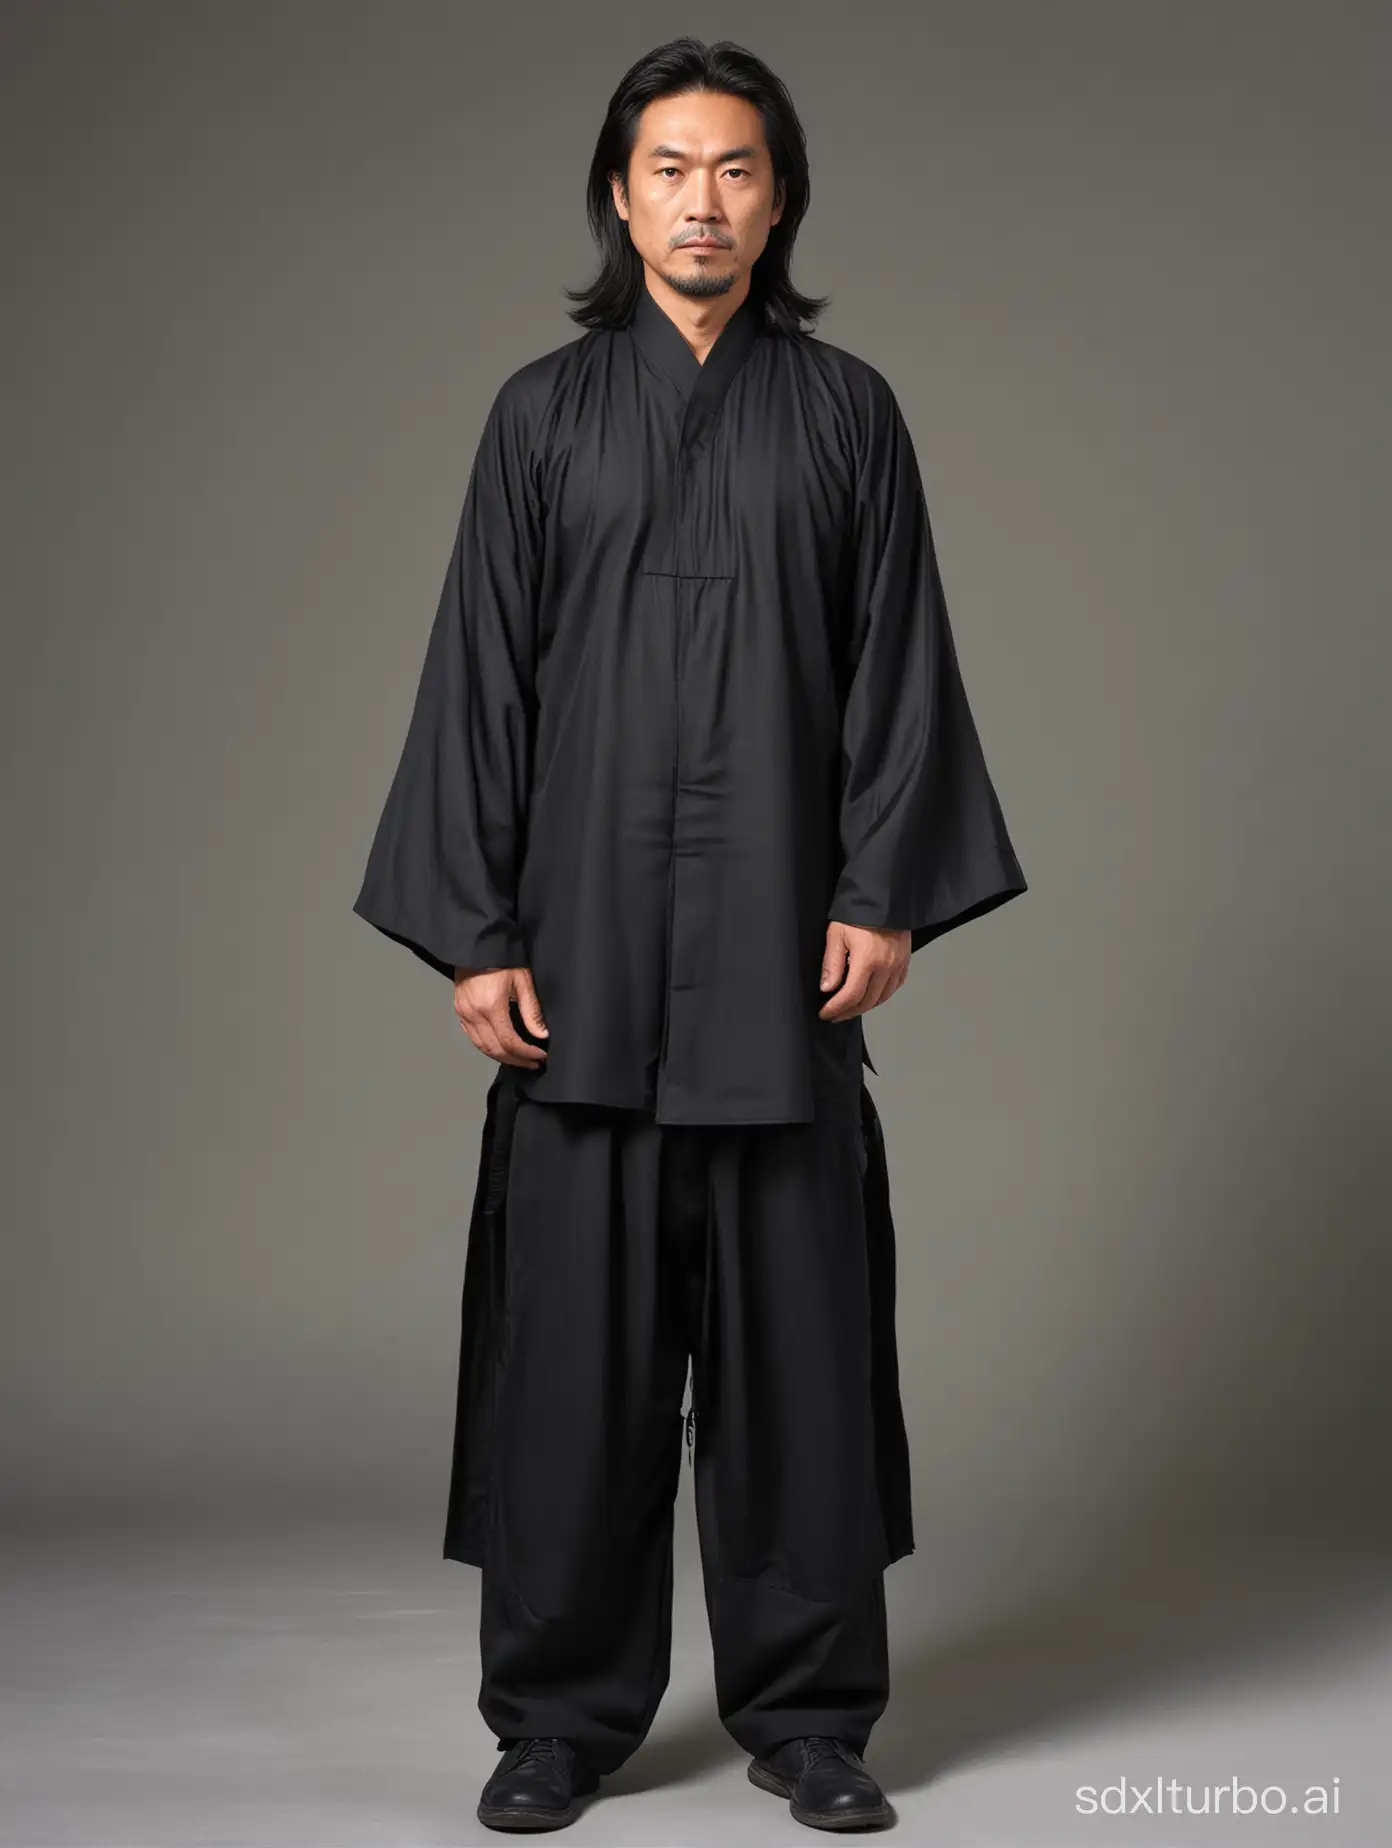 Determined-Sichuanese-Man-in-Black-Outfit-Portrait